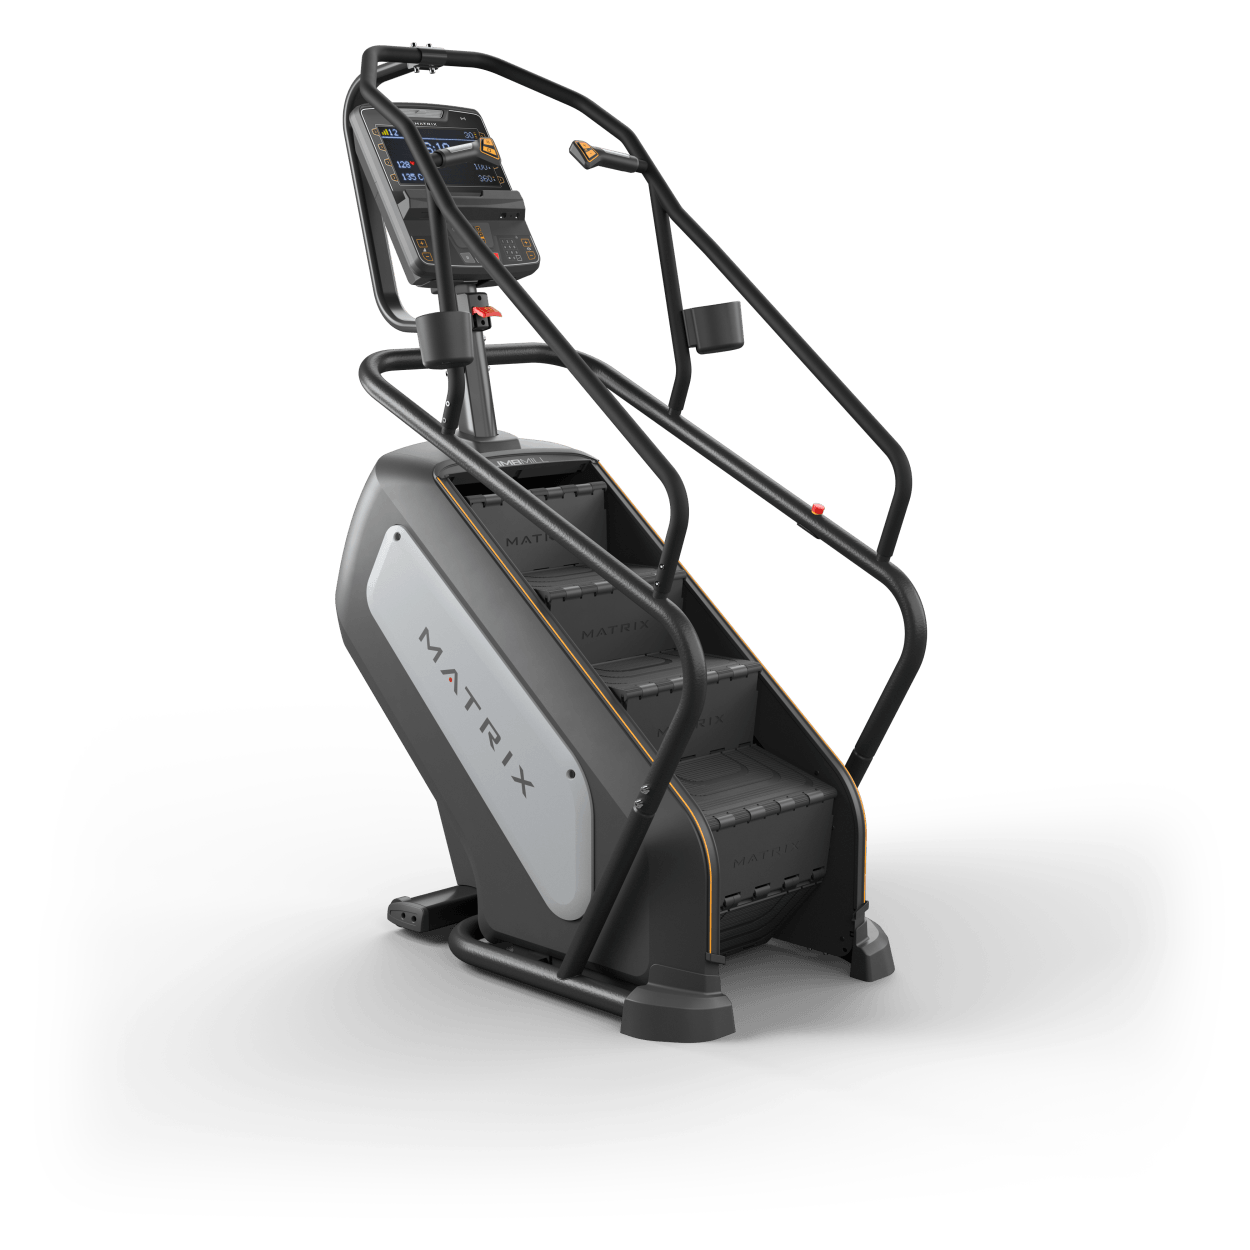 Matrix Fitness Endurance Climbmill with Premium LED Console full view | Fitness Experience